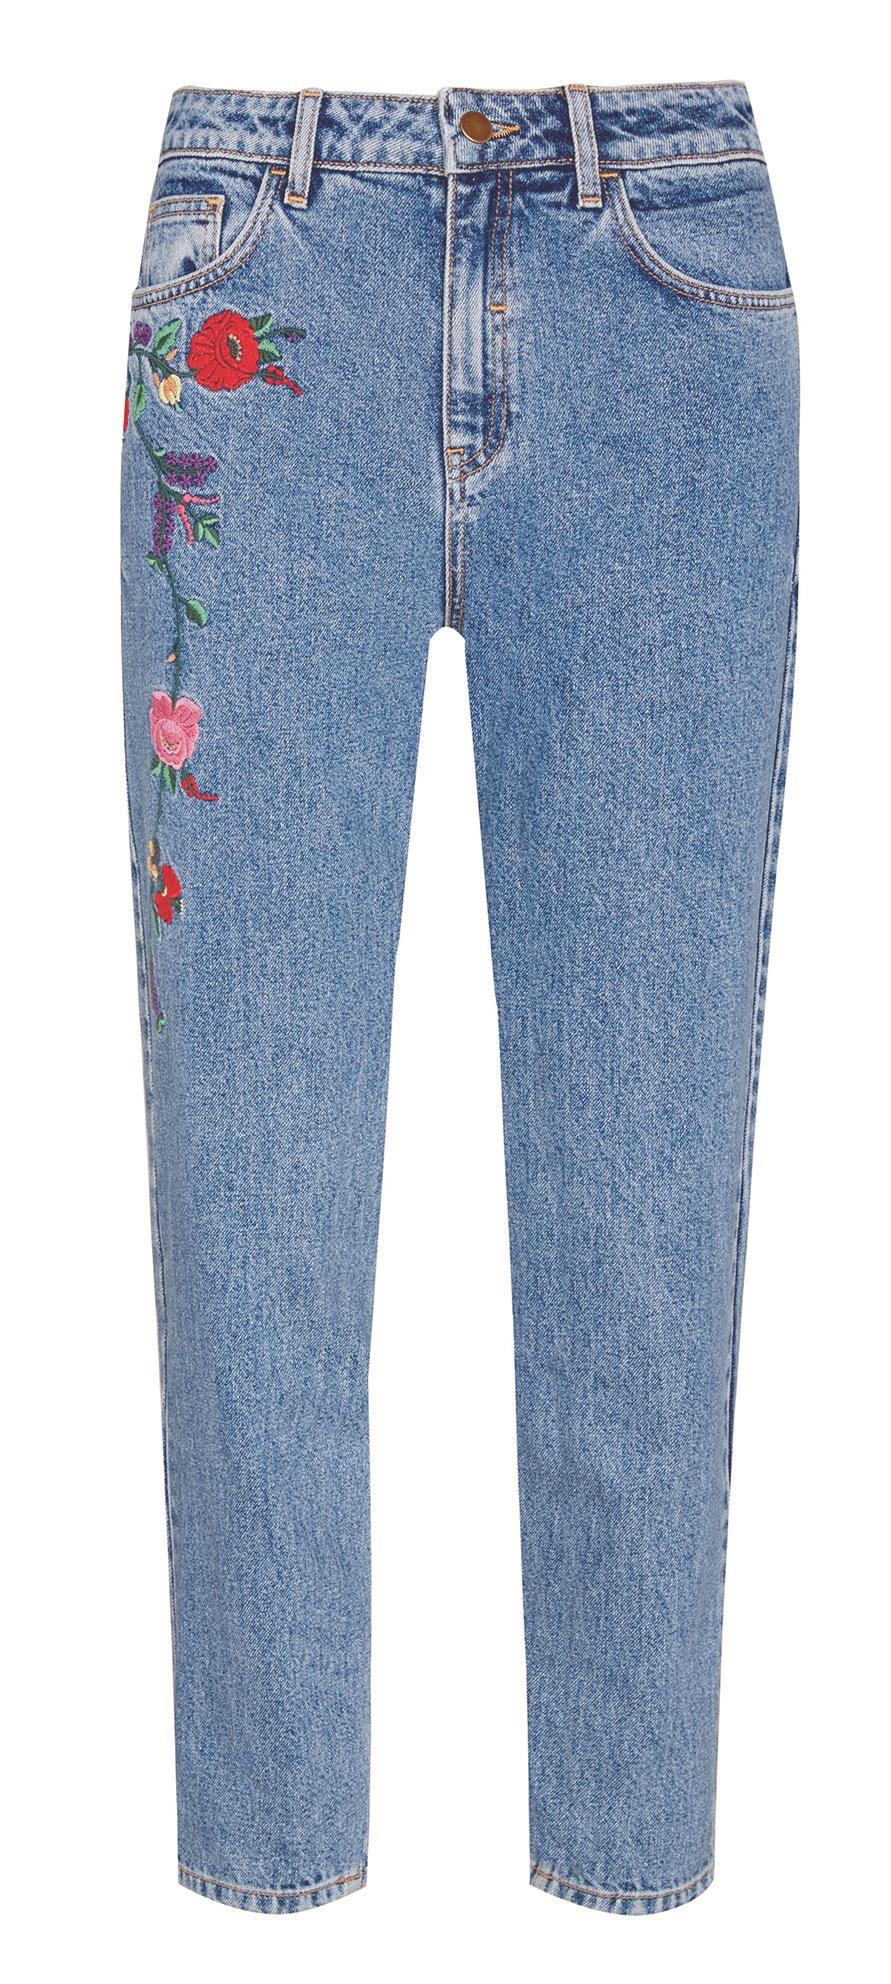 Primark, Embroidered Jeans, £17